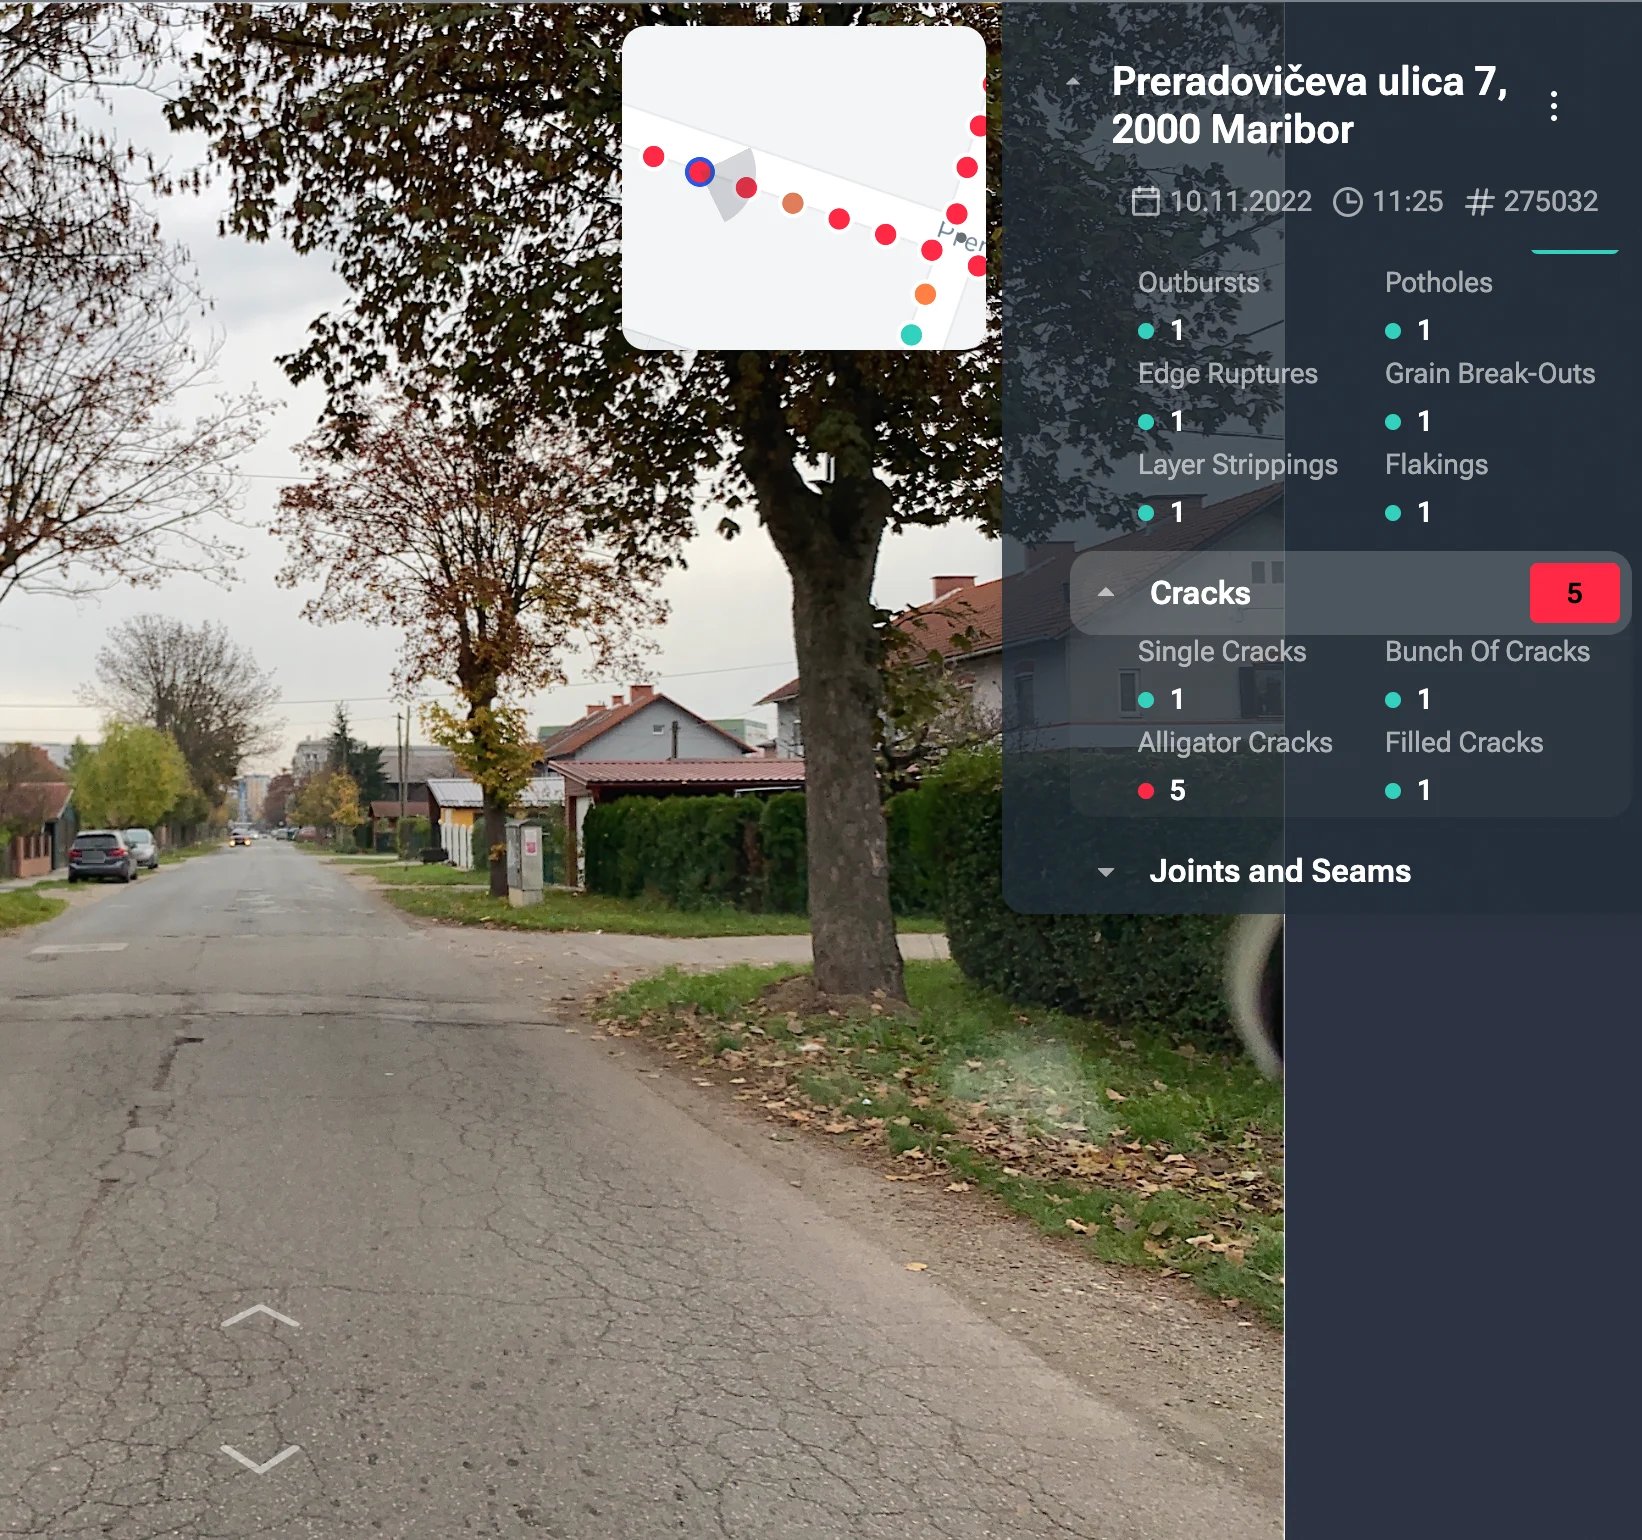 screenshot from the vialytics web system showing a road in Maribor and the condition grades